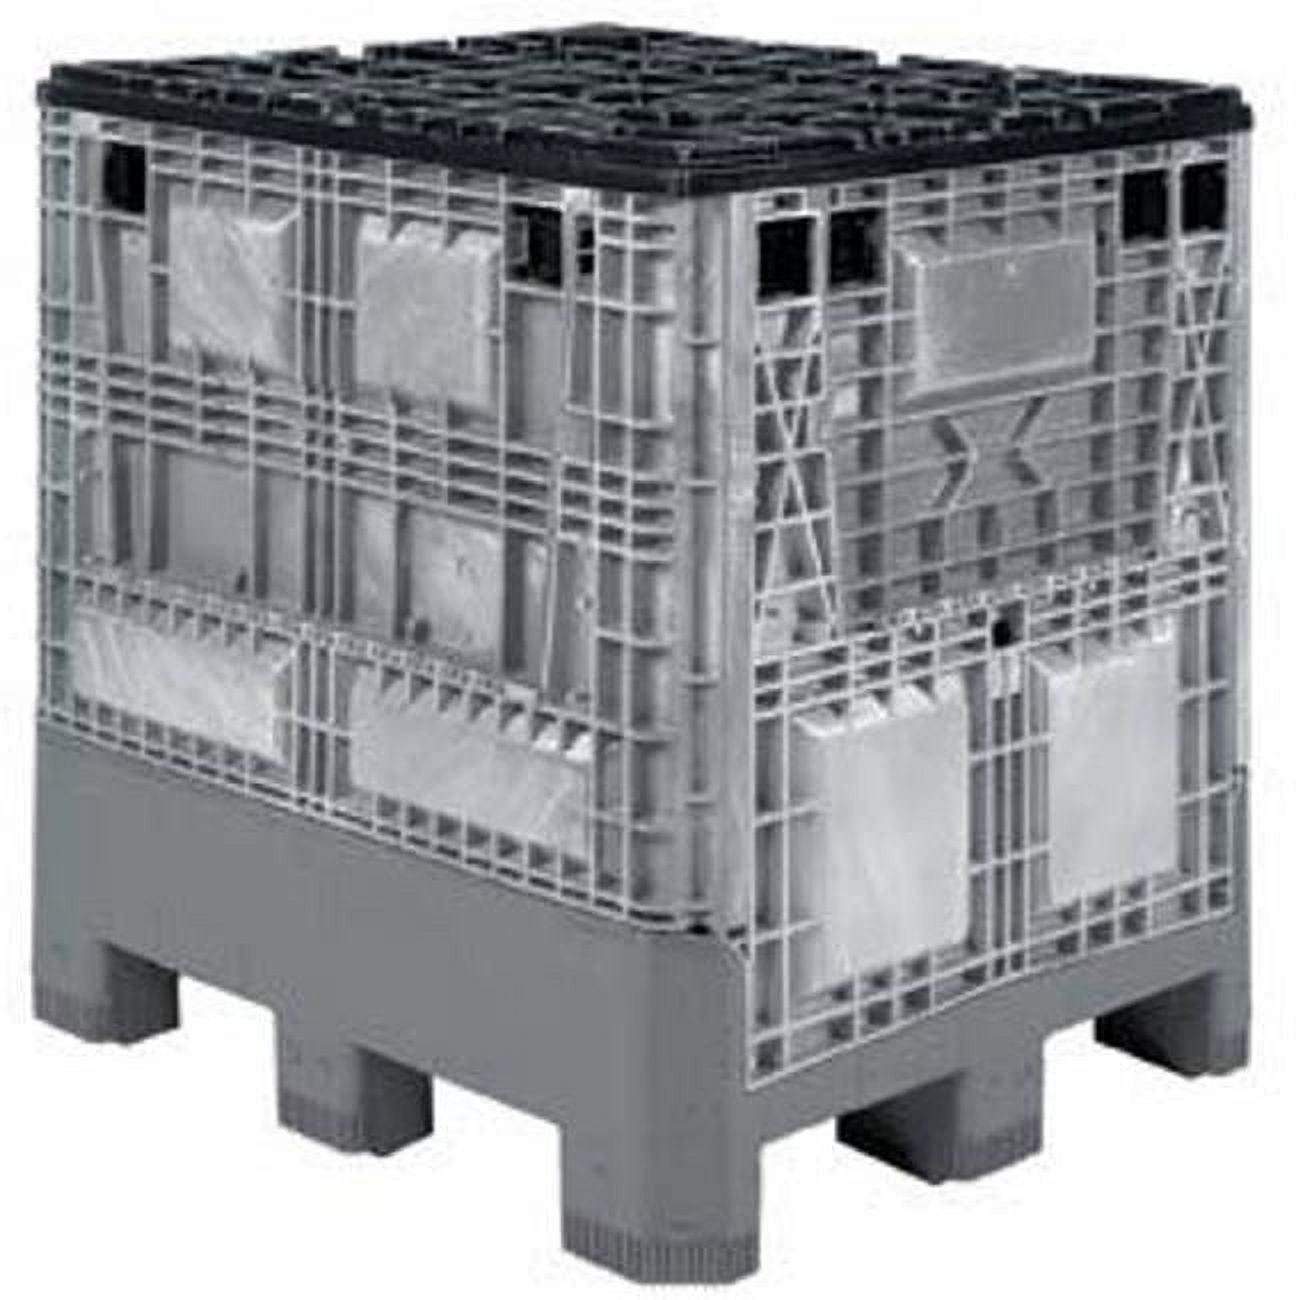 Global Industrial™ Solid Straight Wall Container,  23-3/4Lx15-3/4Wx8-1/4H, Gray - Pkg Qty 4